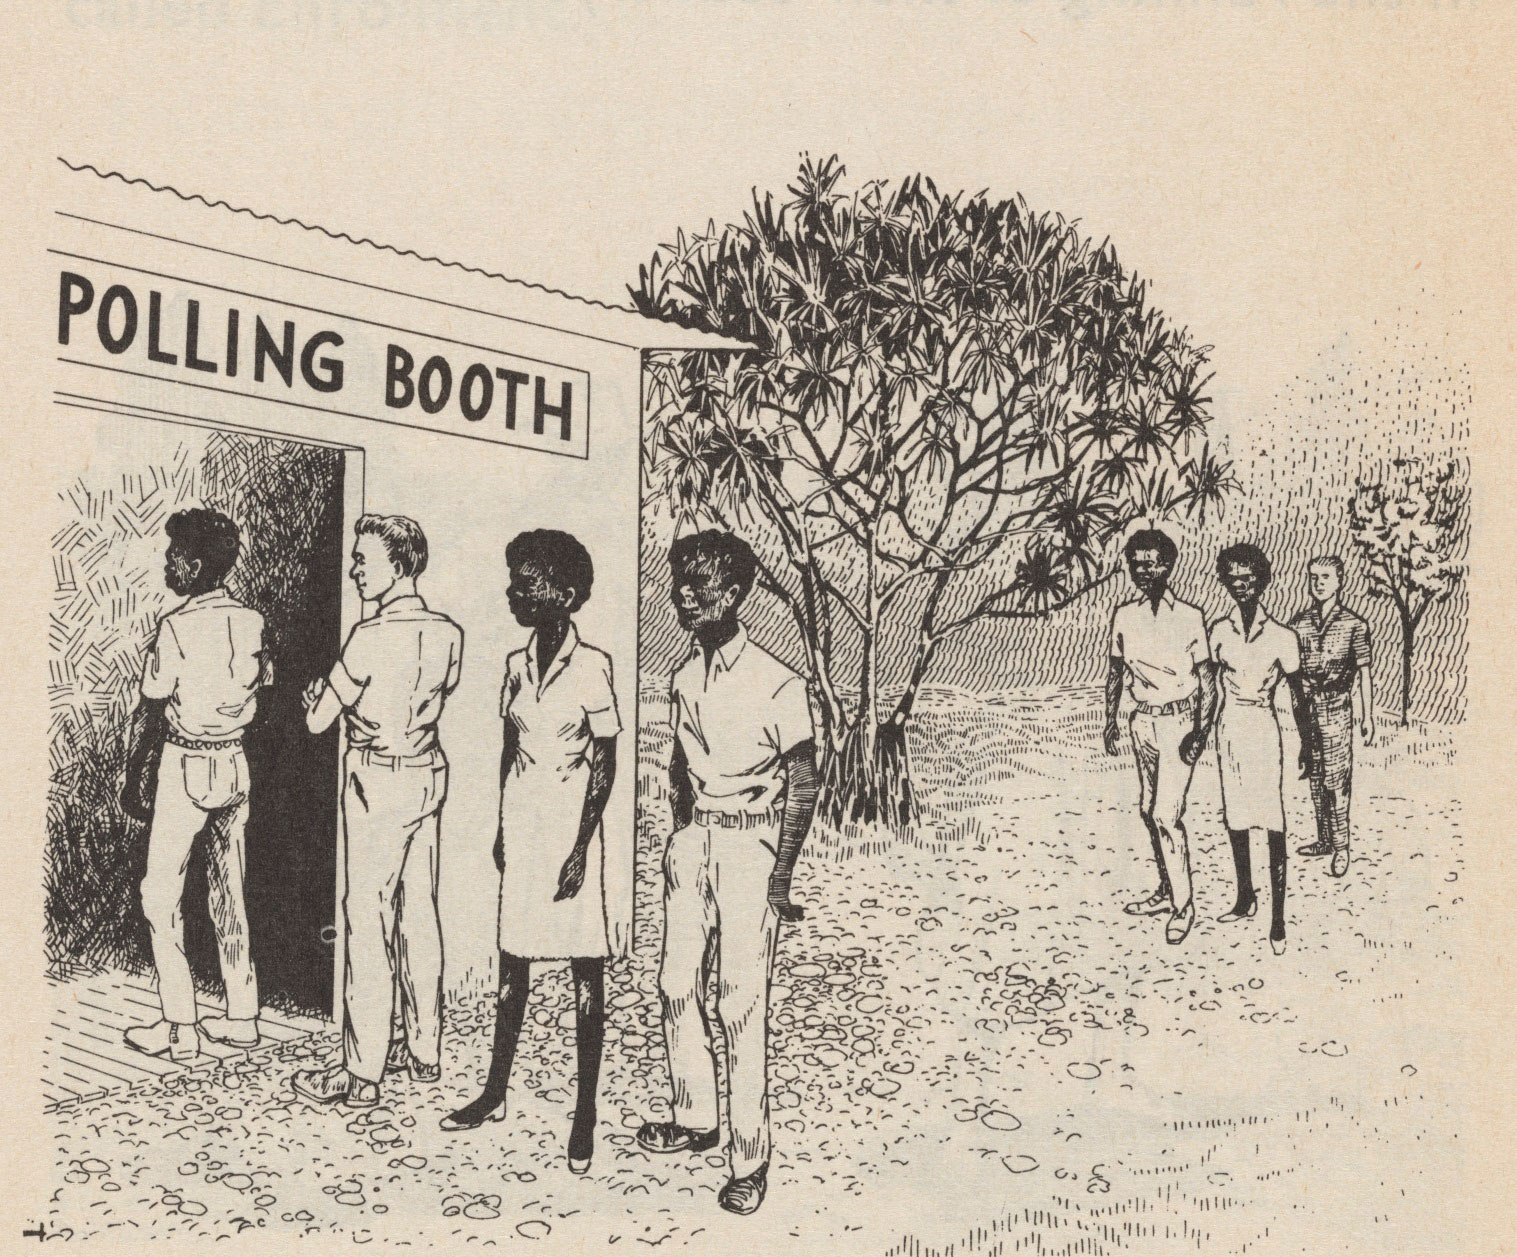 Illustration of people, including Aboriginal people, voting, 1970.